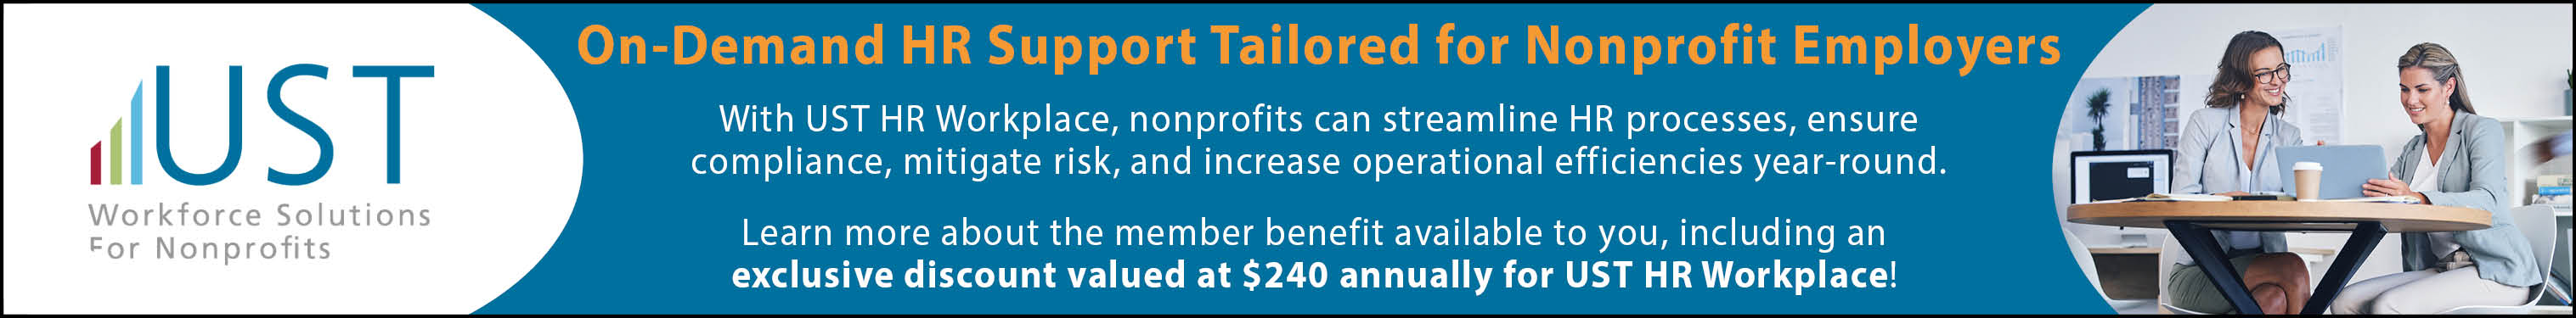 UST Banner - HR Support for Nonprofit Employers